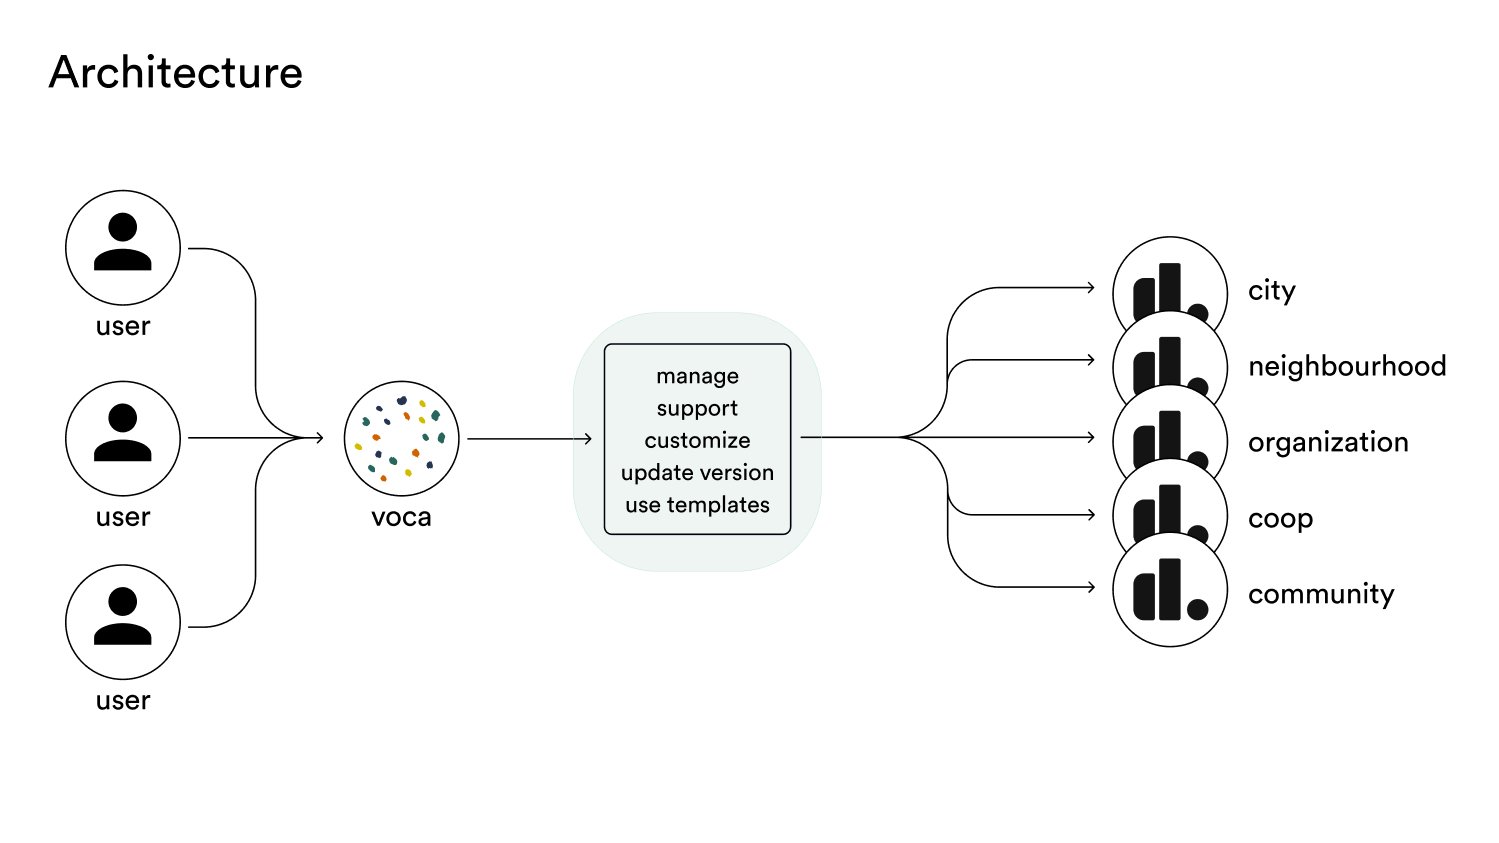  Voca enables the deployment of decidim in an easy and stable way to setup your participatory democracy platform in minutes, no technical knowledge needed, full support. 